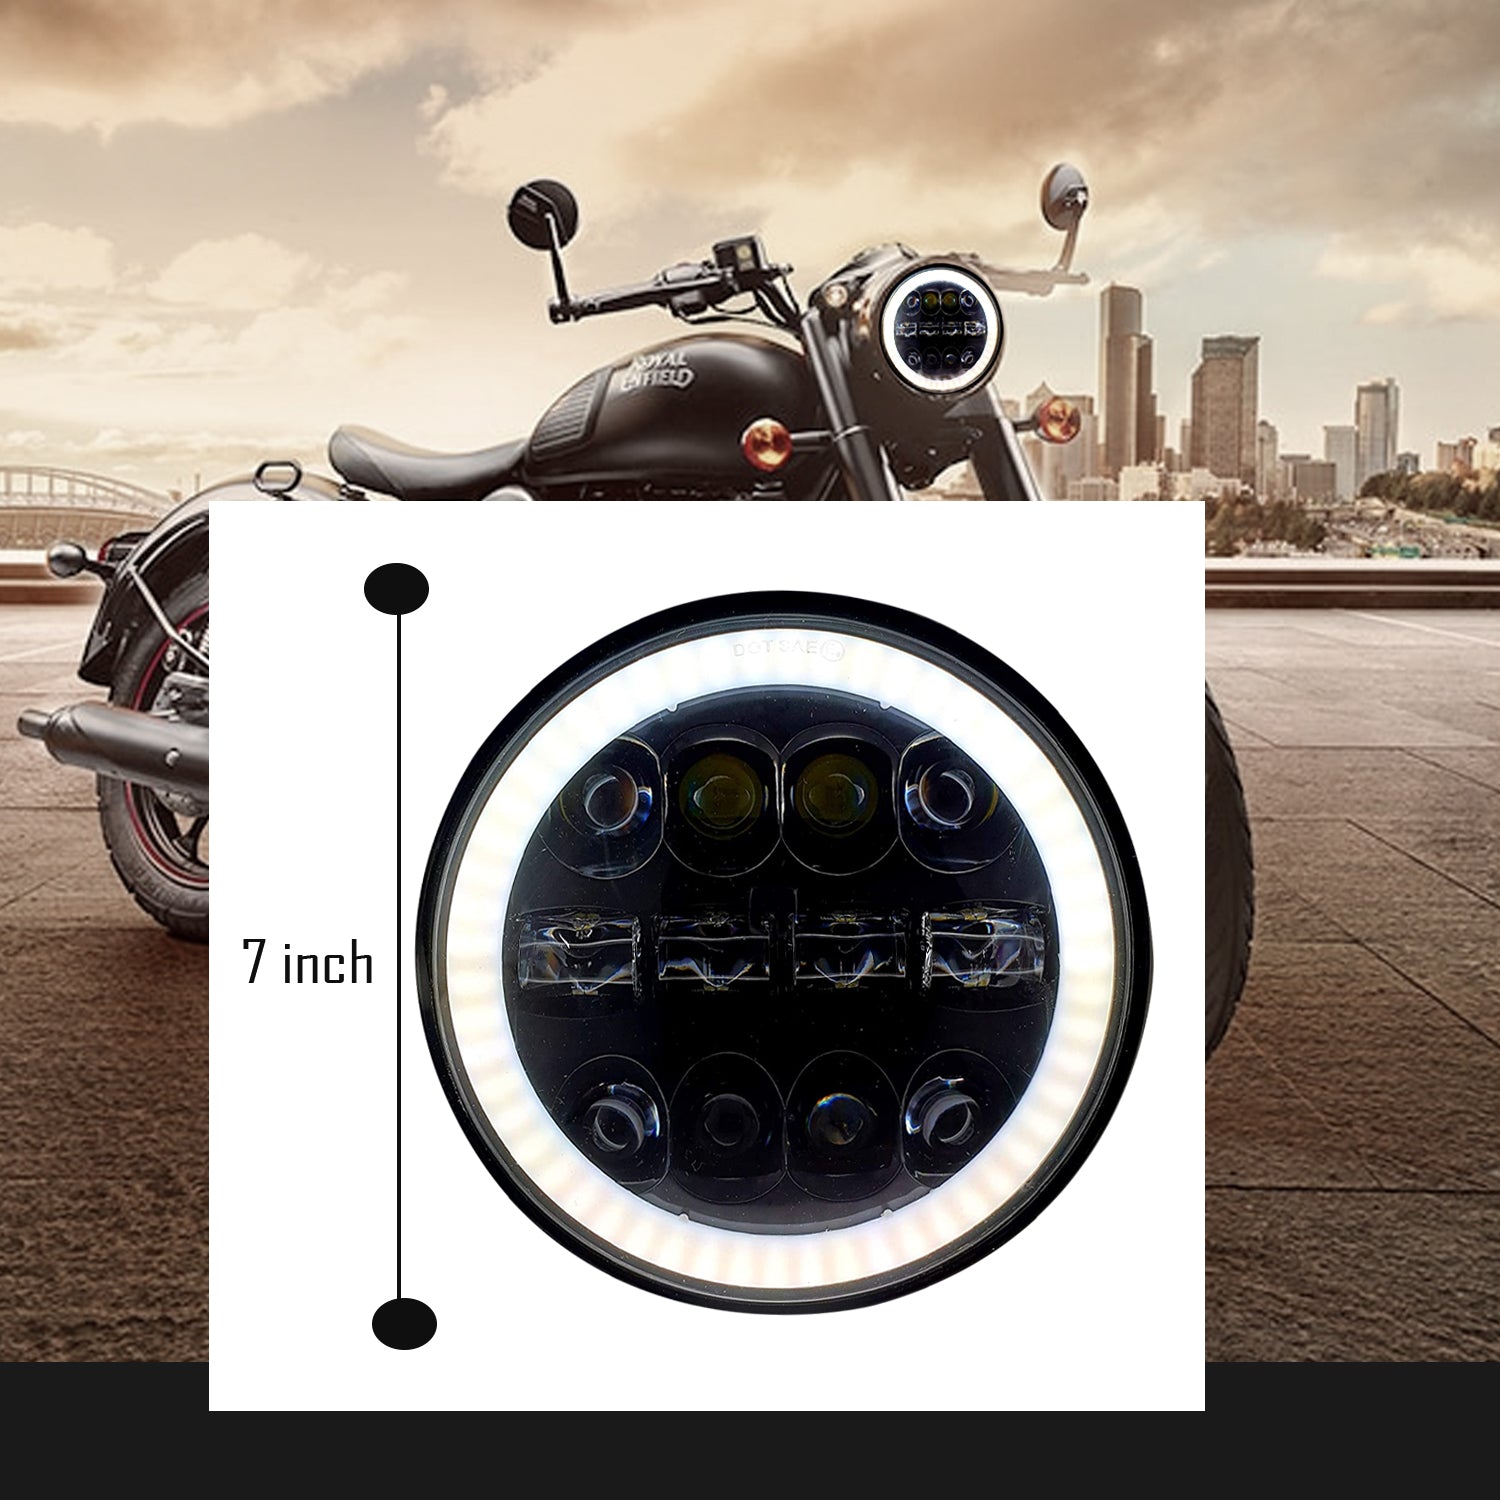 HJG 7 Inch Round Headlight Compatible with Royal Enfield, Jeep & Harley Davidson (12 LED WHITE) (12V-80V, 75W) - bikerstore.in